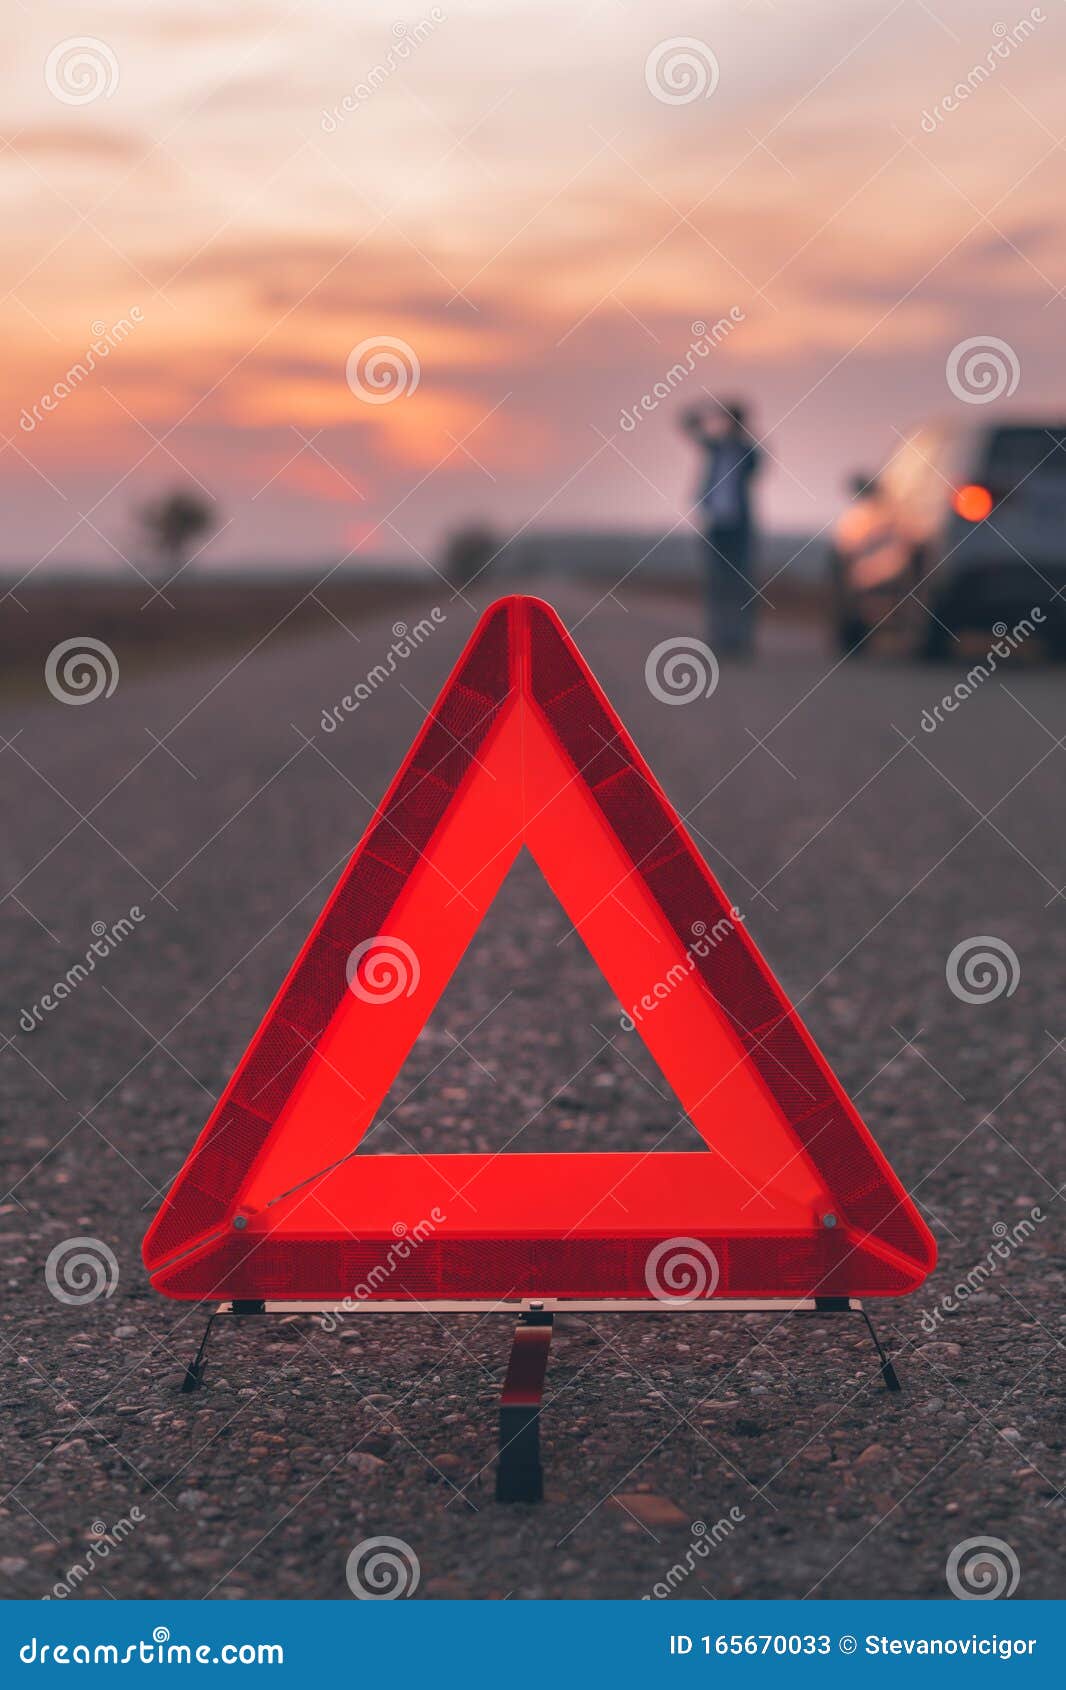 warning triangle sign on the road